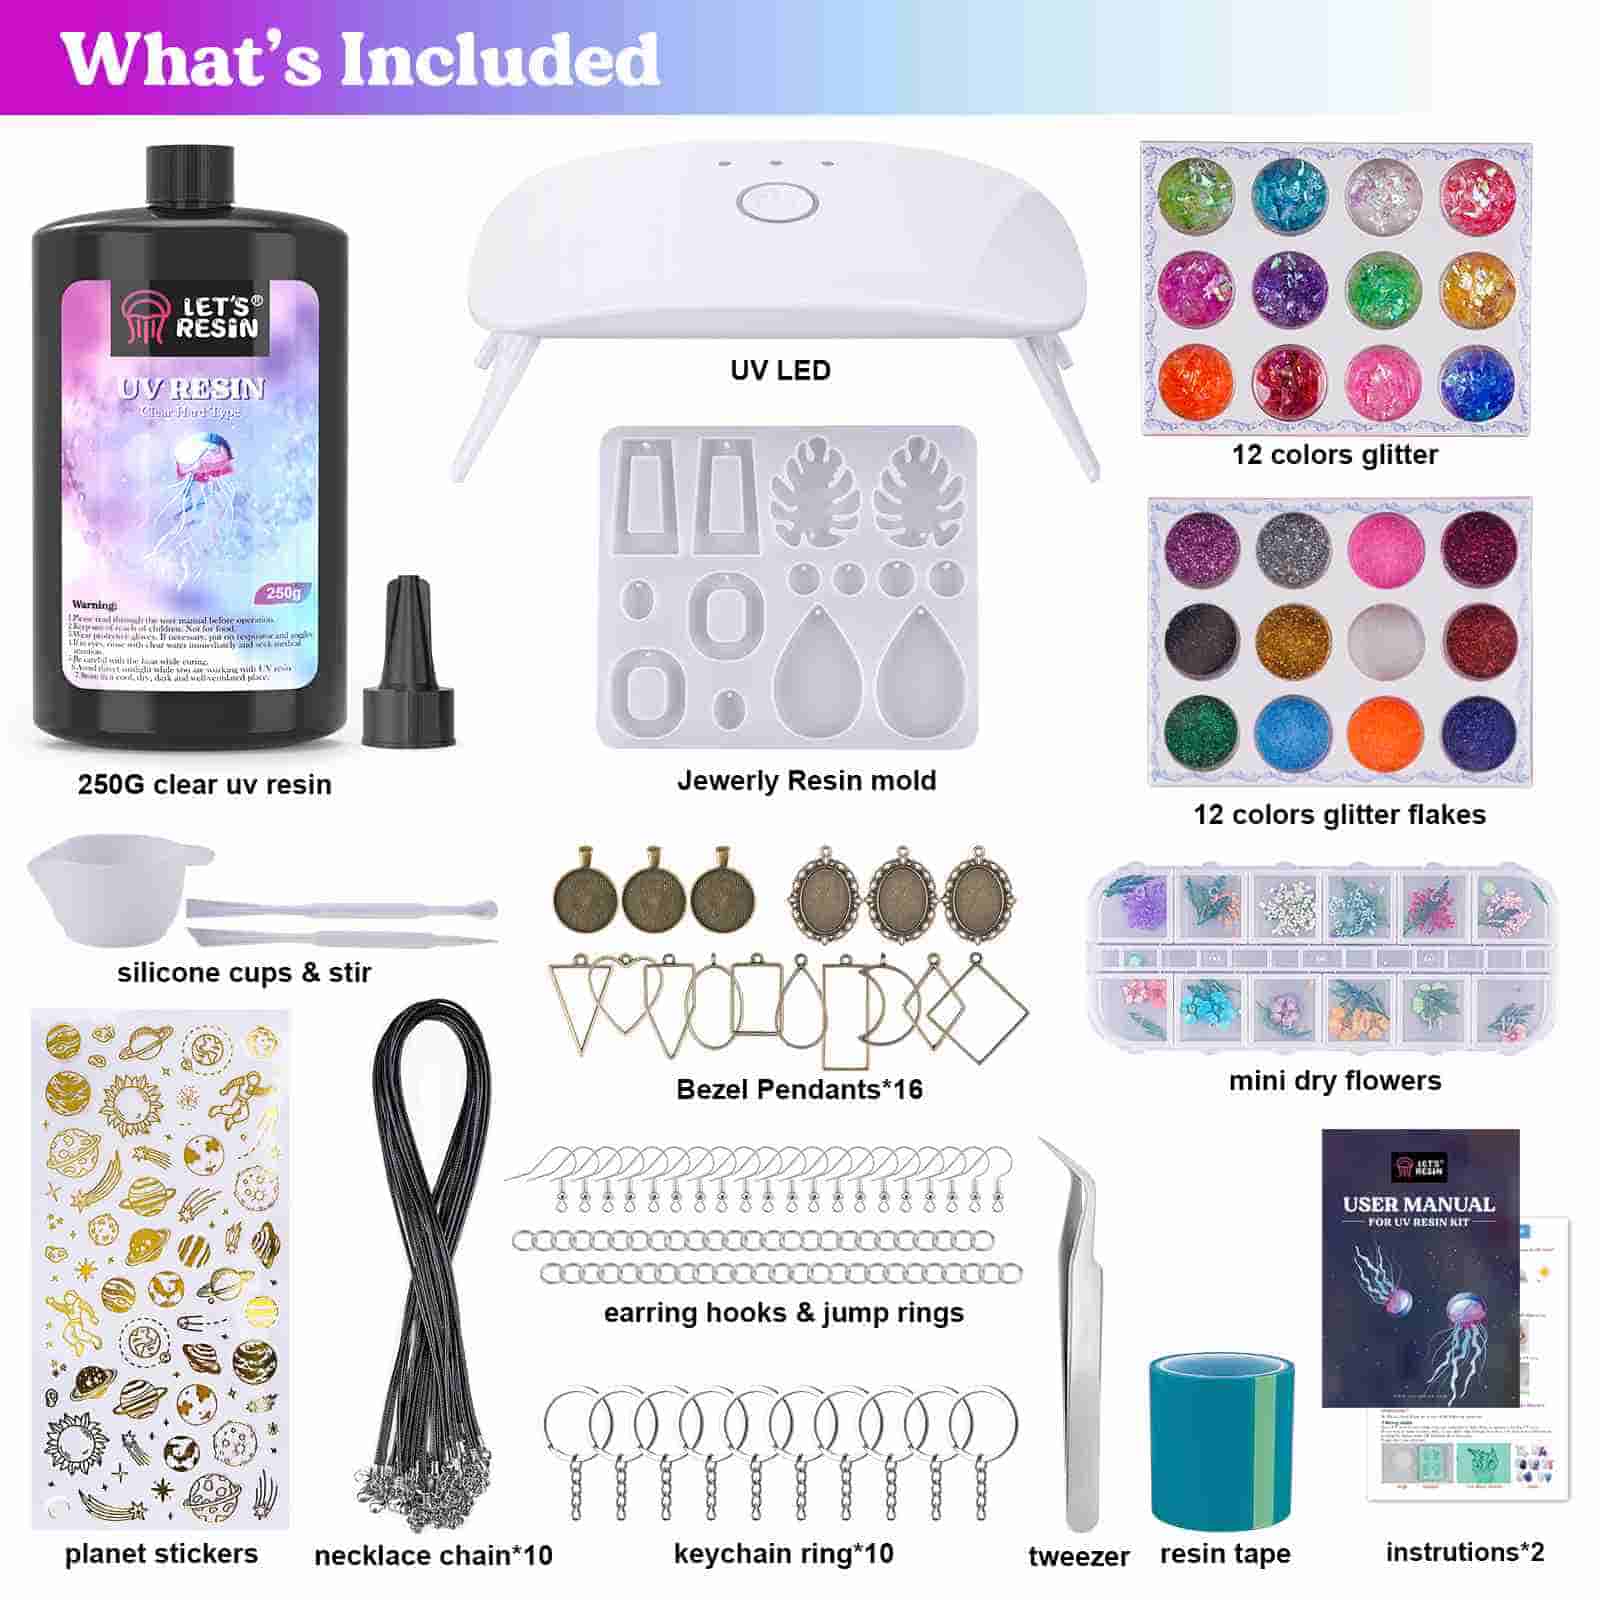 UV Resin and Uv Light With Open Back Bezels Jewelry Making Kit